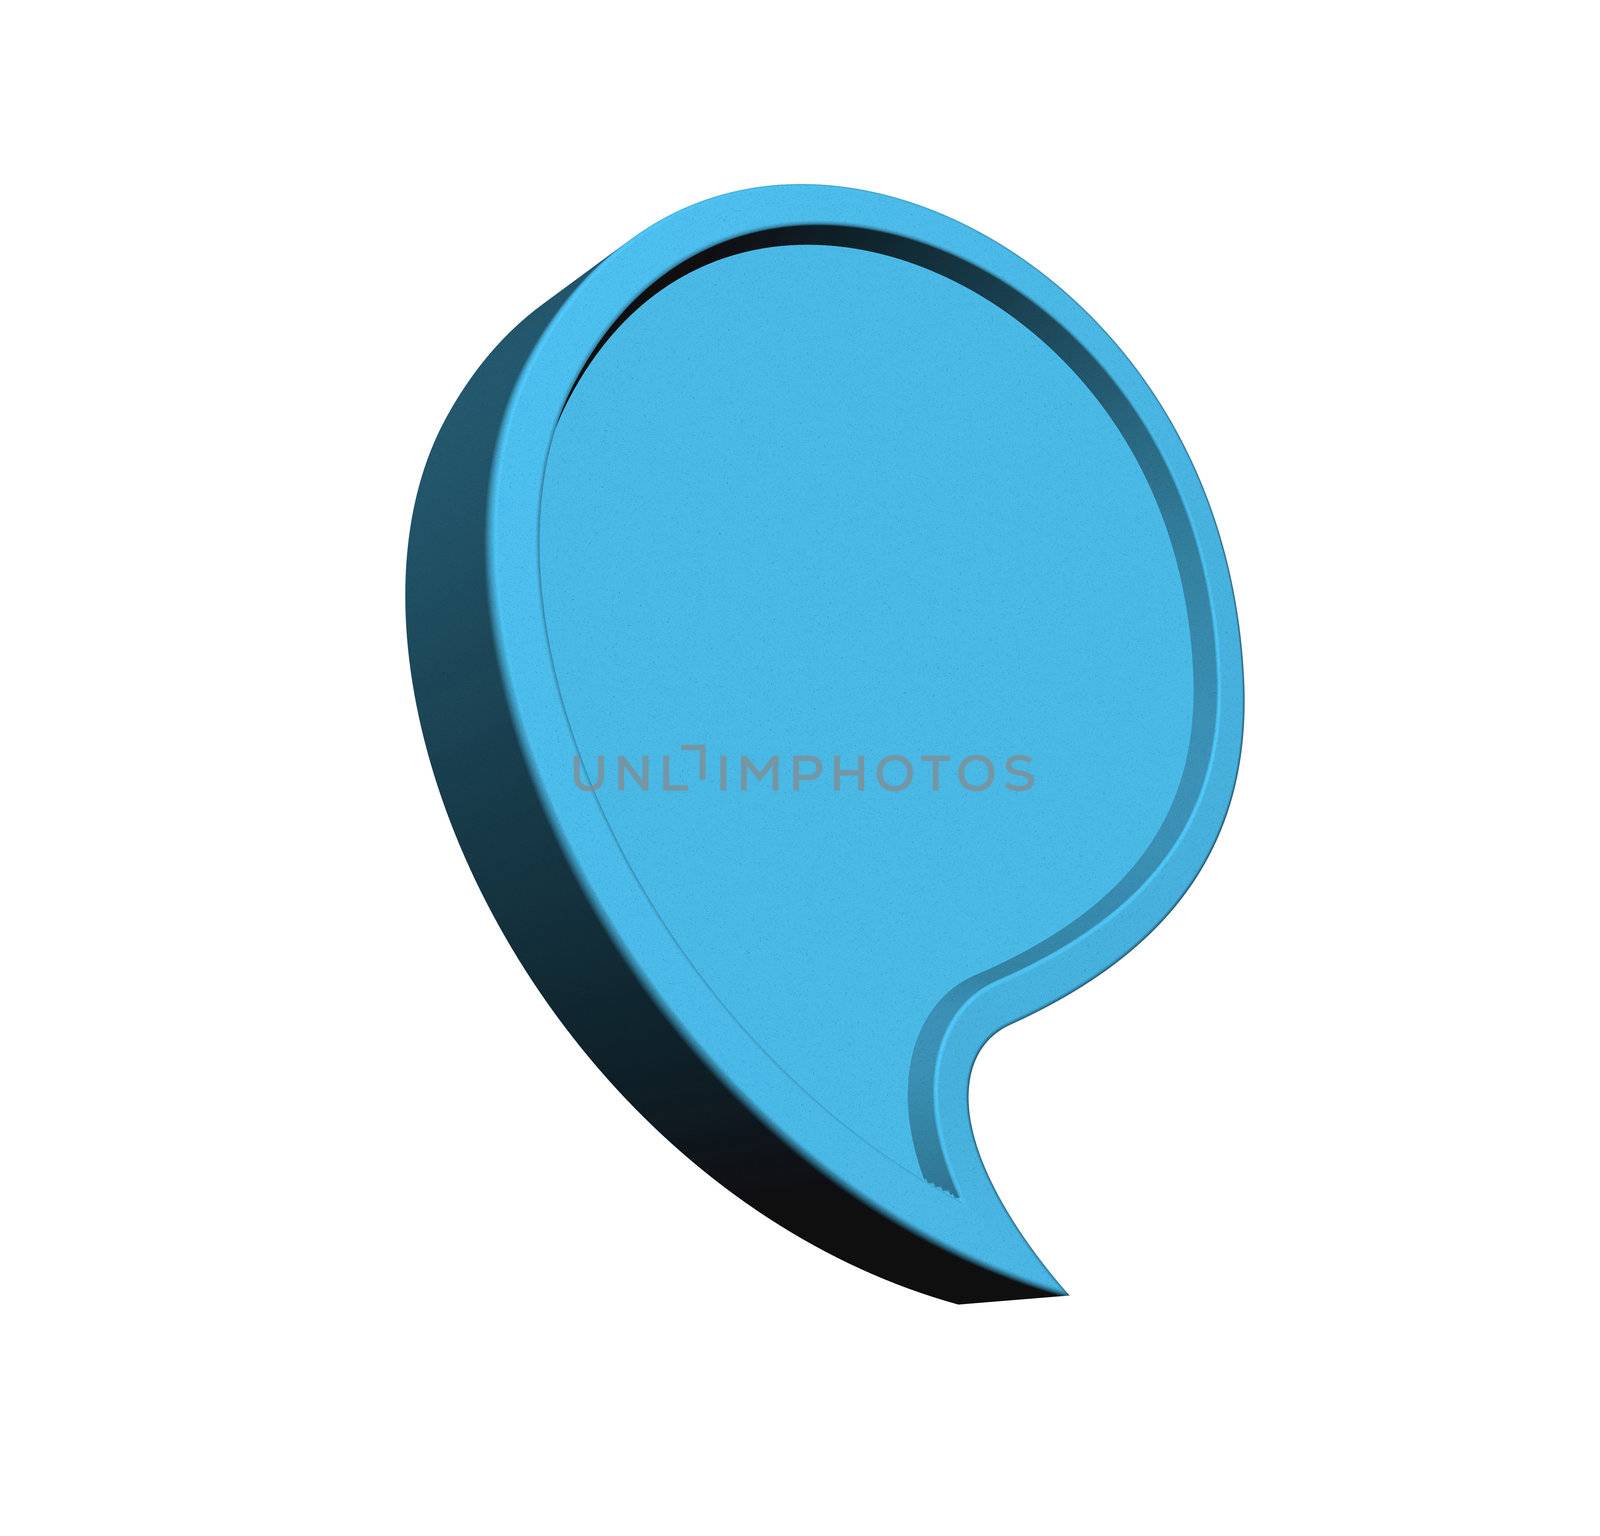 3D Sky blue dialogue bubble isolated on white background. Included clipping path, so you can easily cut it out and place over the top of your own design.